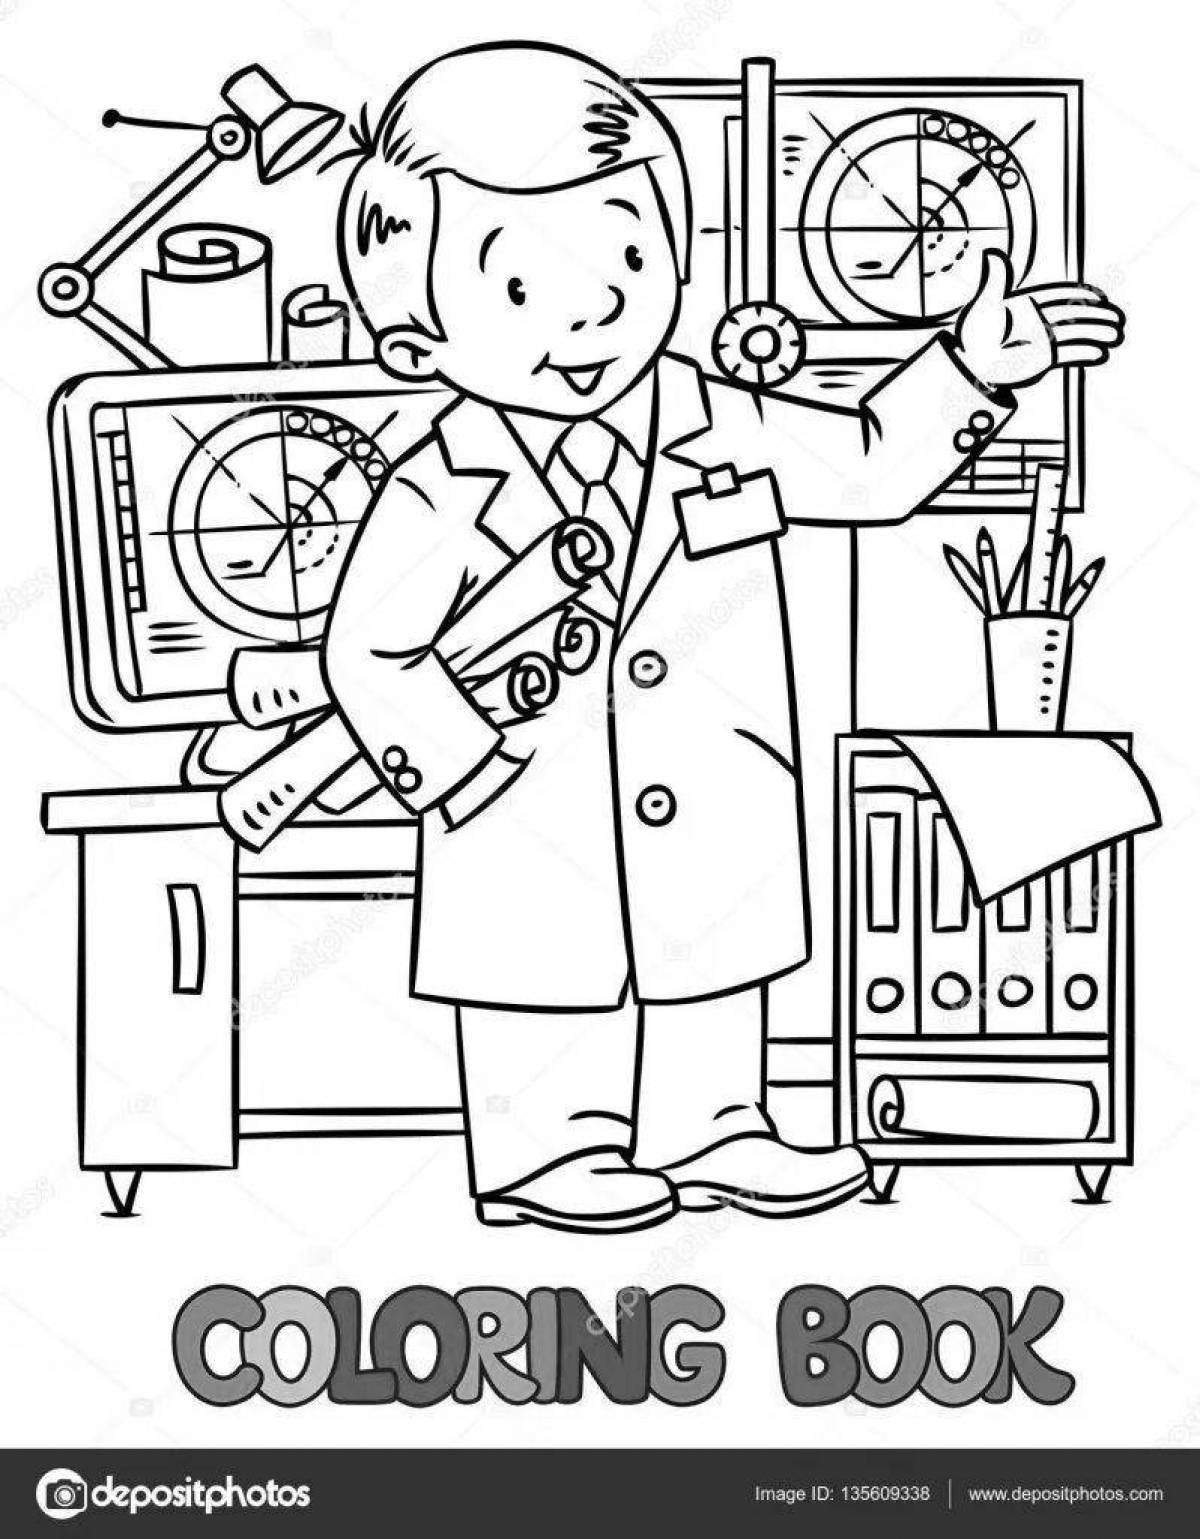 Color-zesty children's inventions coloring page